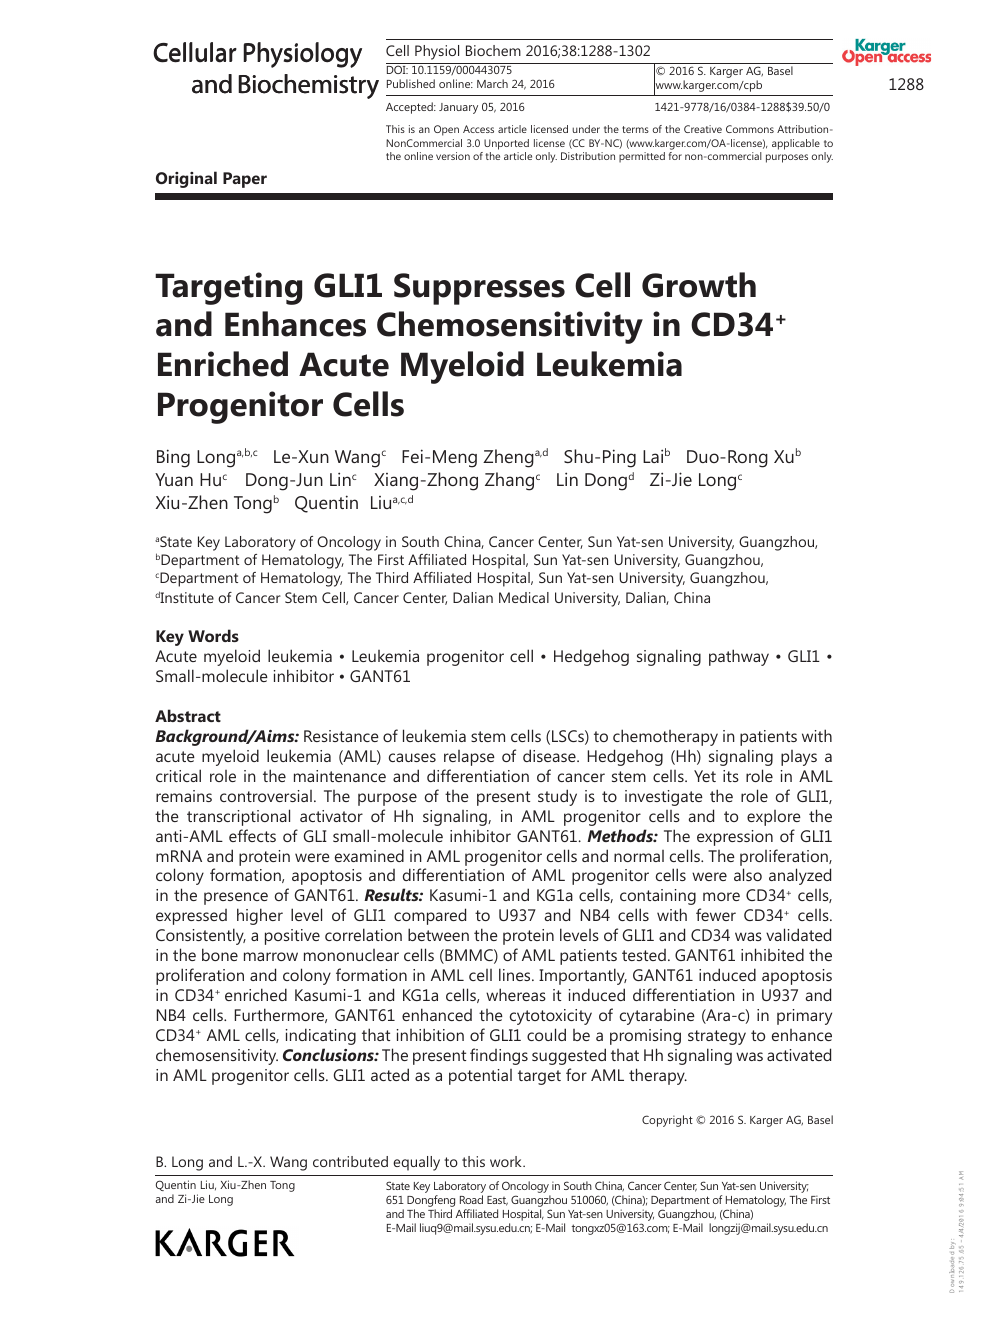 Targeting Gli1 Suppresses Cell Growth And Enhances - 